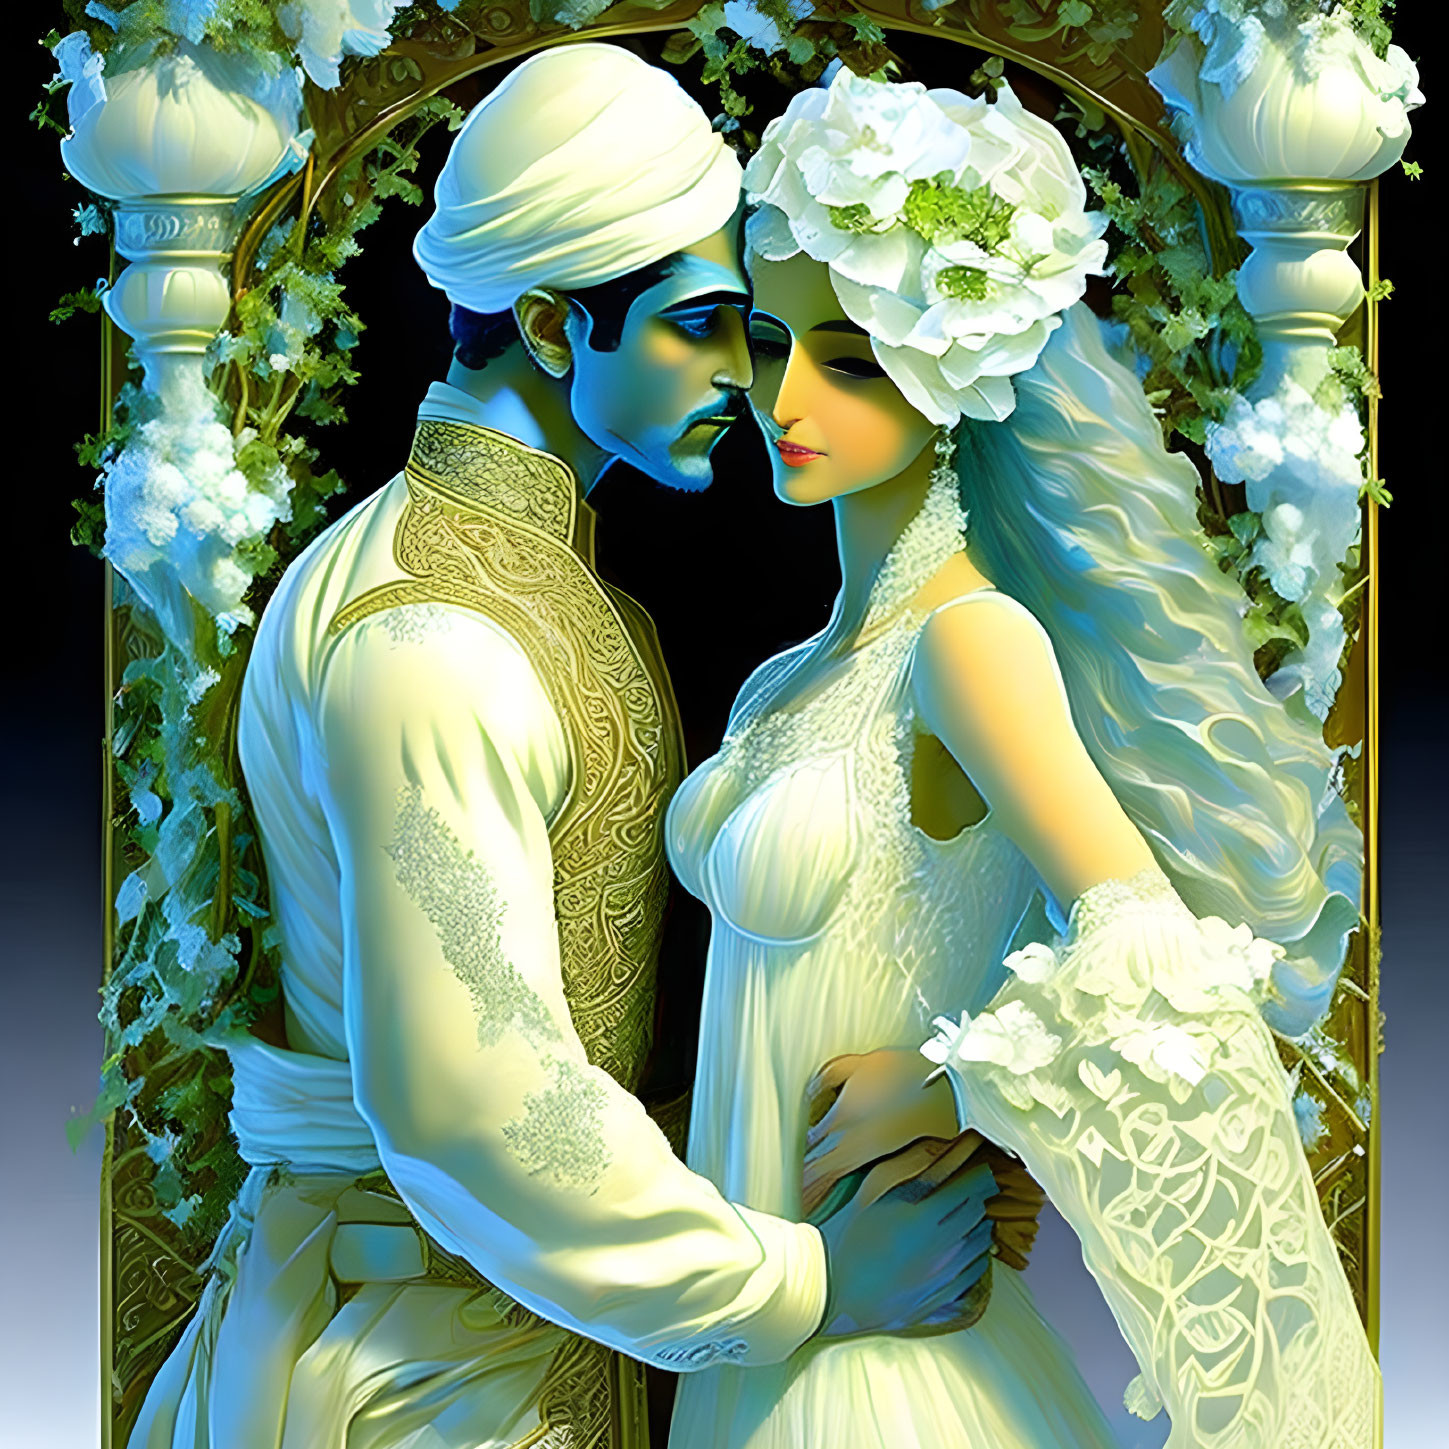 Illustrated couple in ethnic wedding attire under floral arch